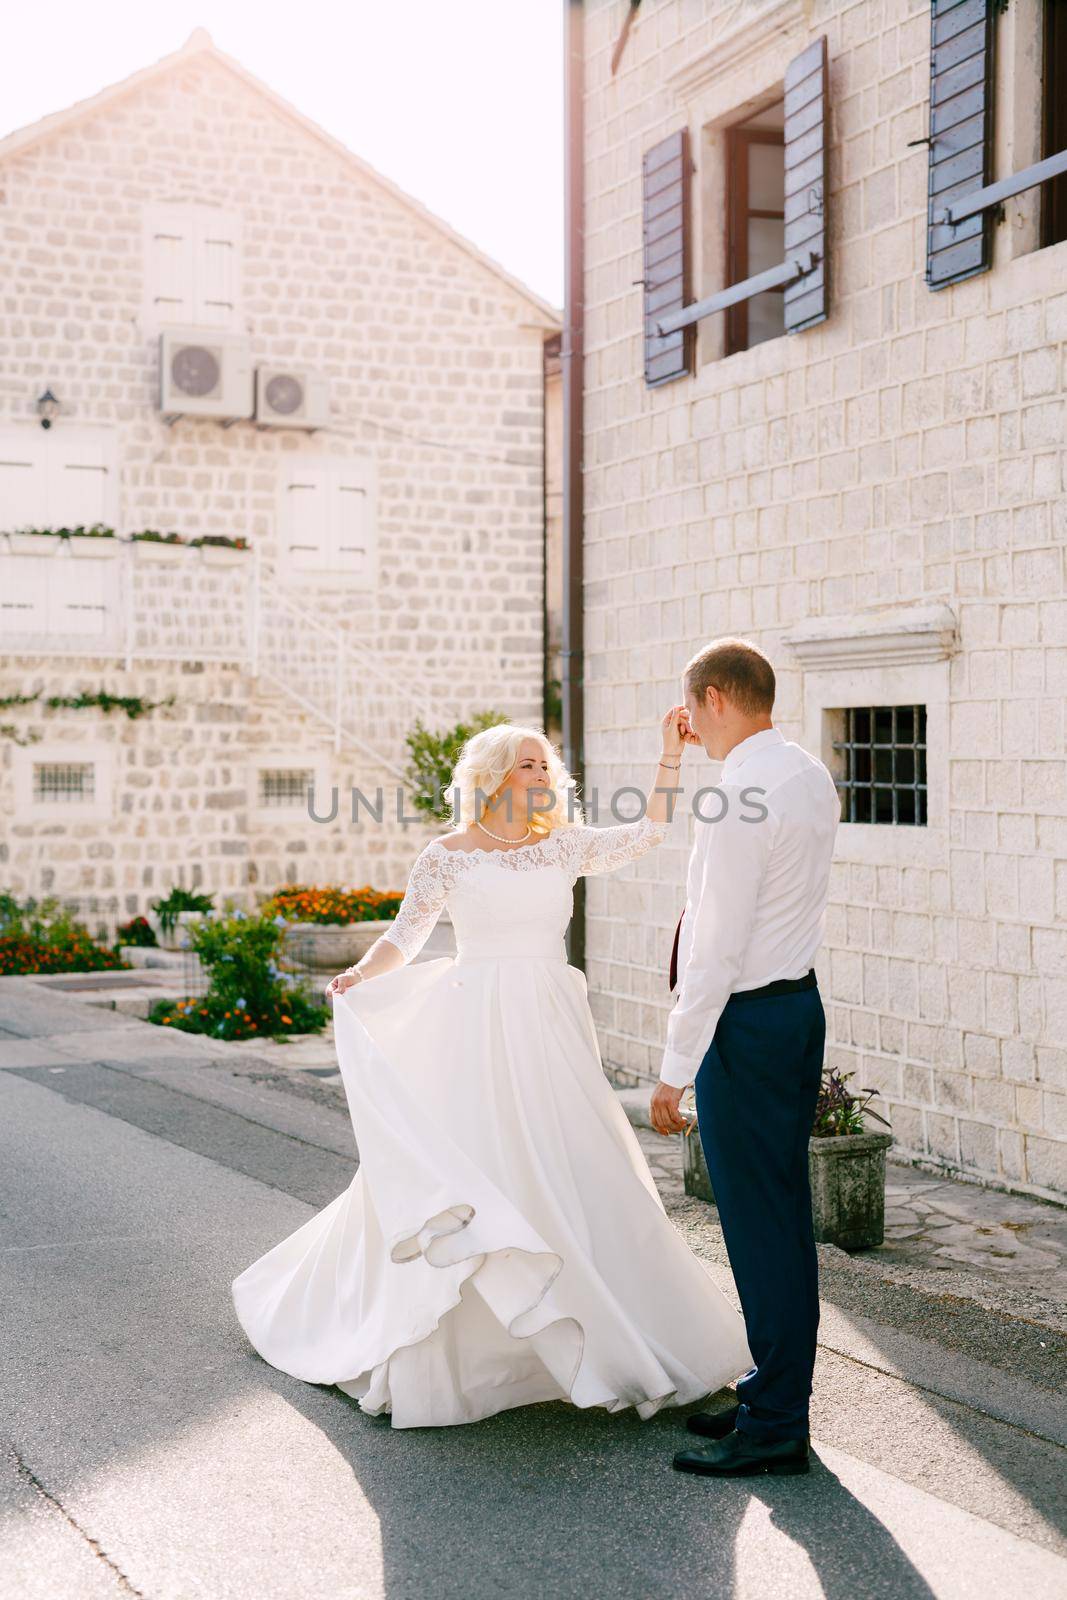 The bride and groom are dancing on the road near the beautiful white house in the old town of Perast by Nadtochiy